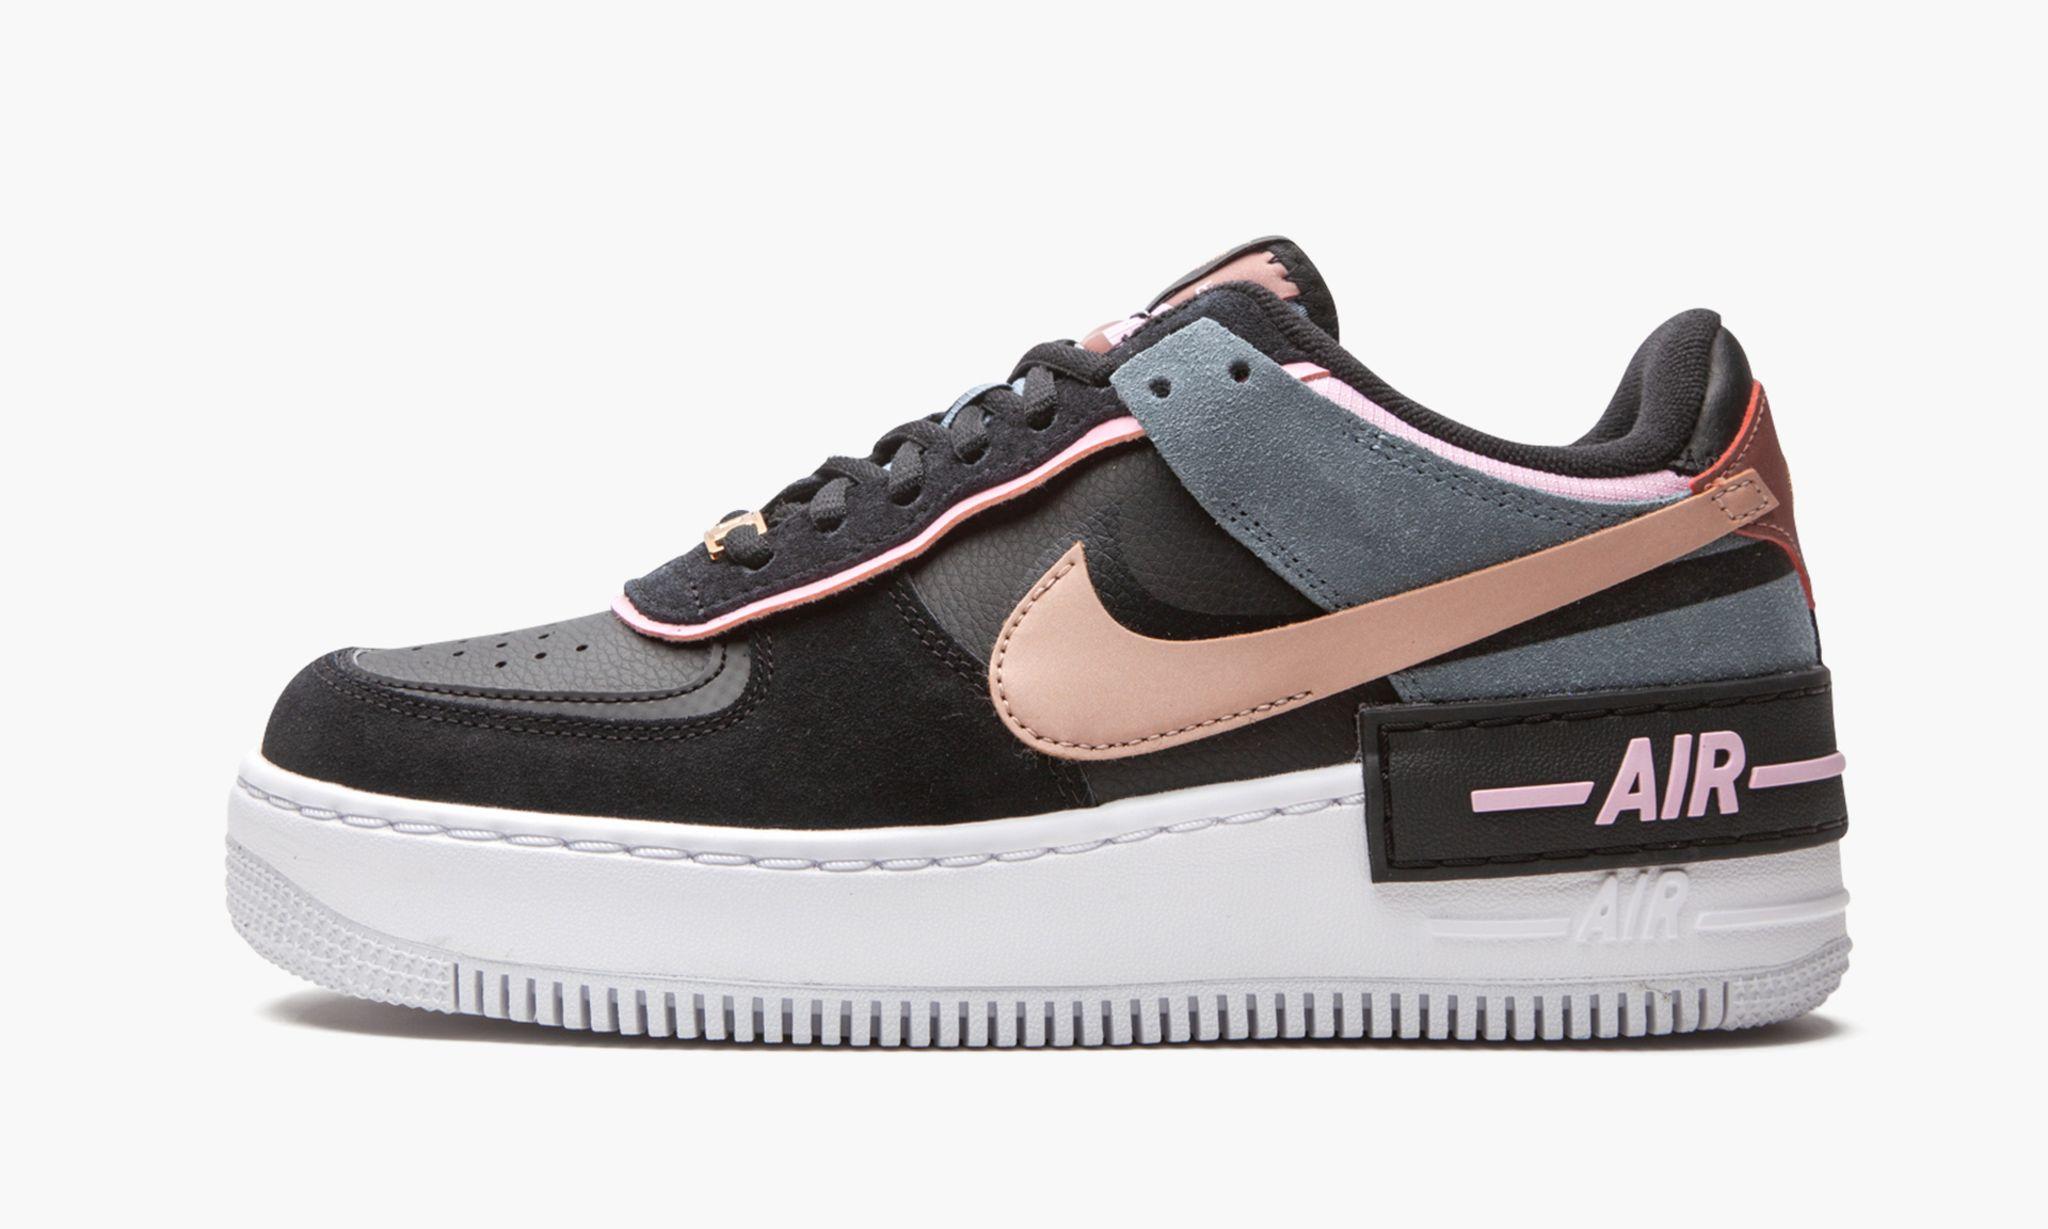 Nike Air Force 1 Shadow "black / Light Arctic Pink" Shoes | Lyst